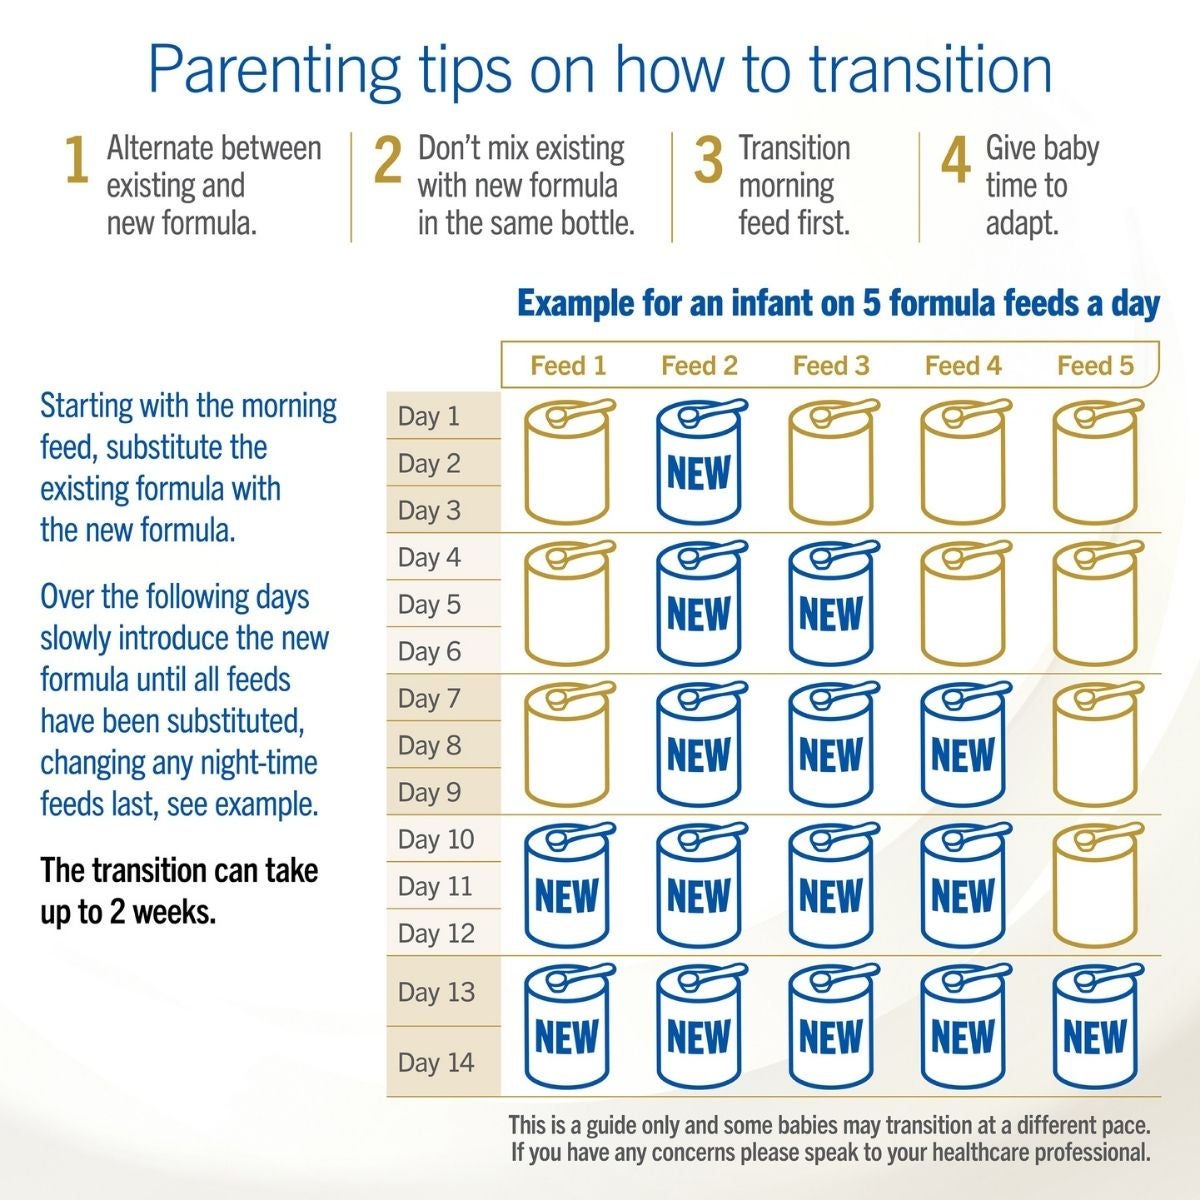 tips on how to transition between different milk feeding options